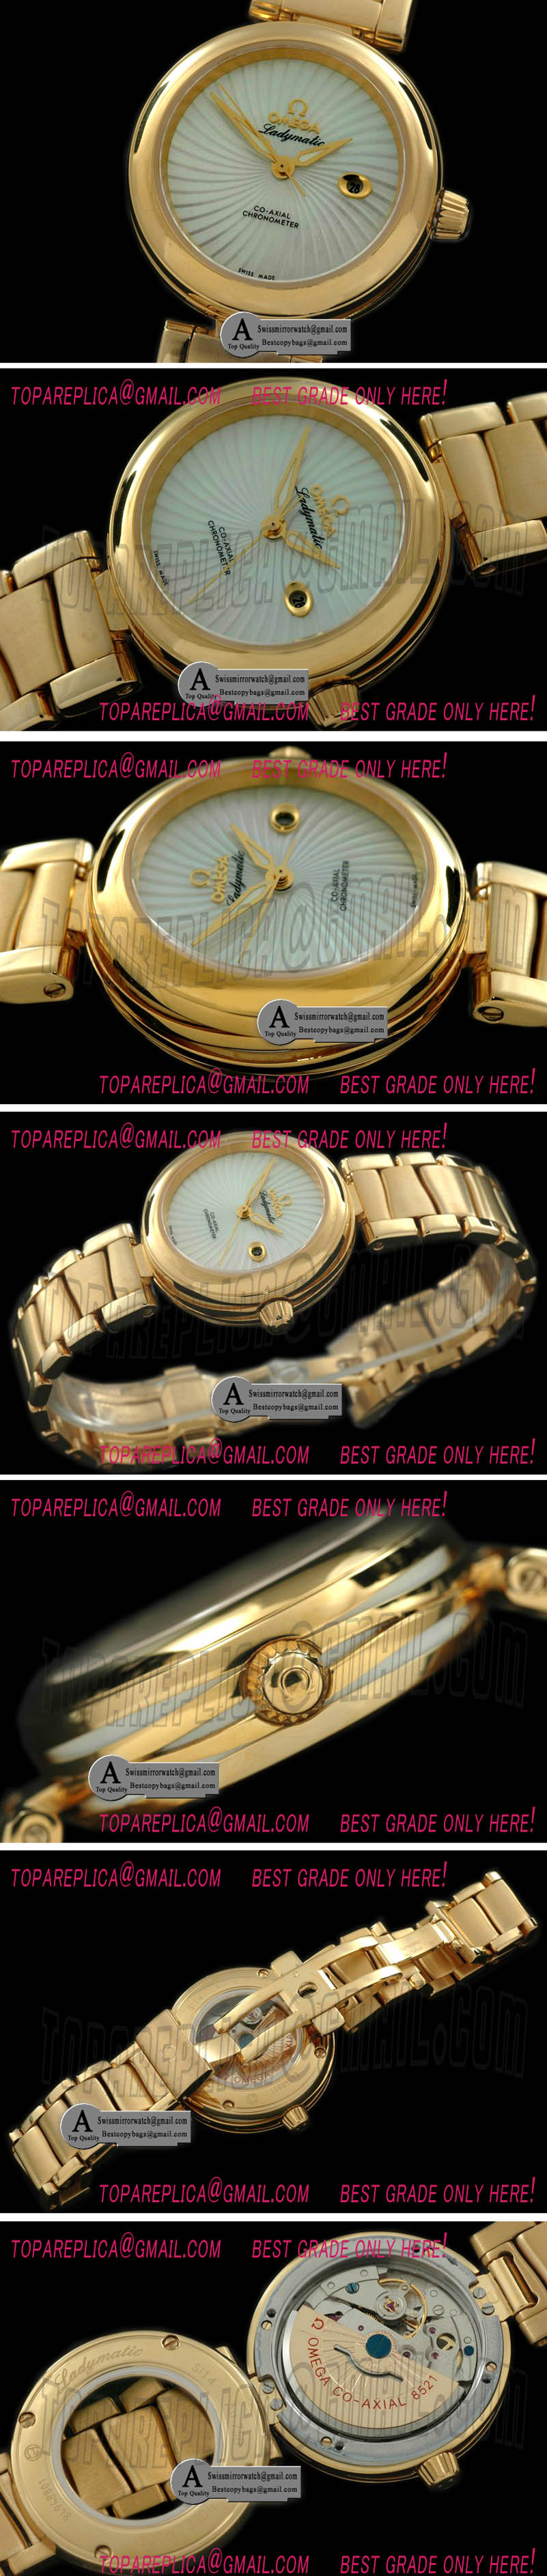 Omega Deville Ladymatic Mid Yellow Gold/Yellow Gold White 2813 21J Replica Watches